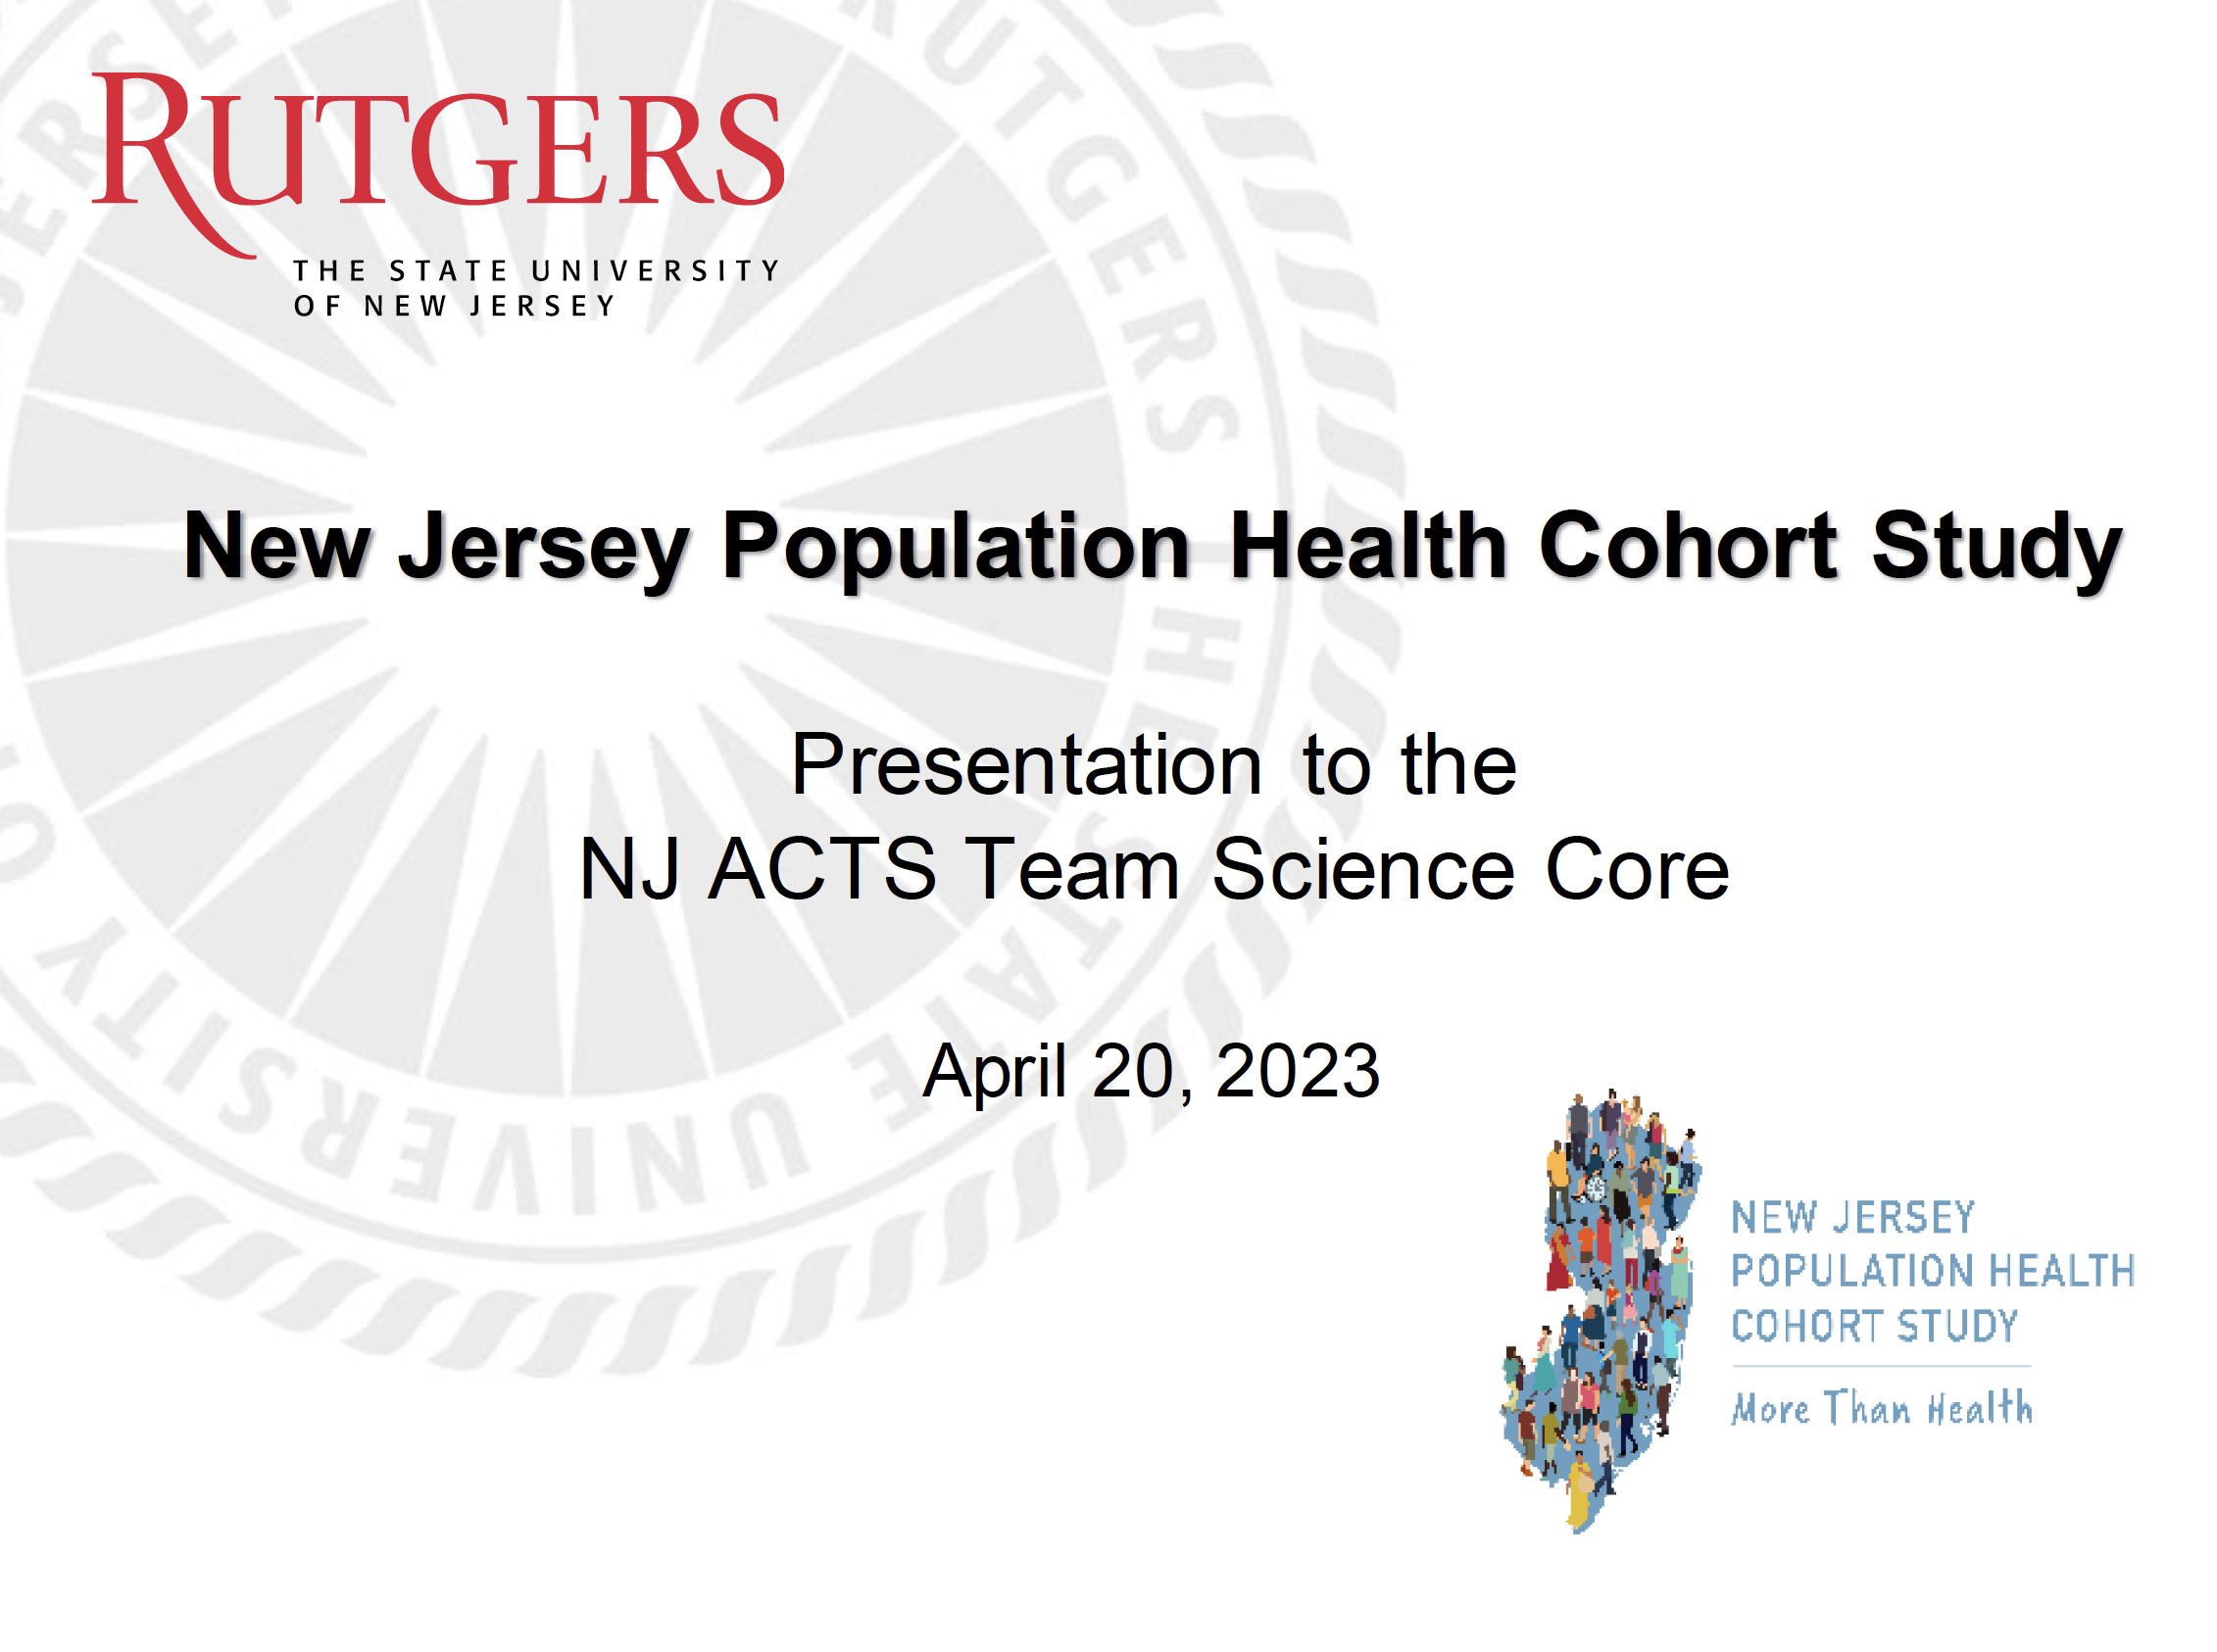 NJ ACTS Team Science Core NJHealth Study Briefing